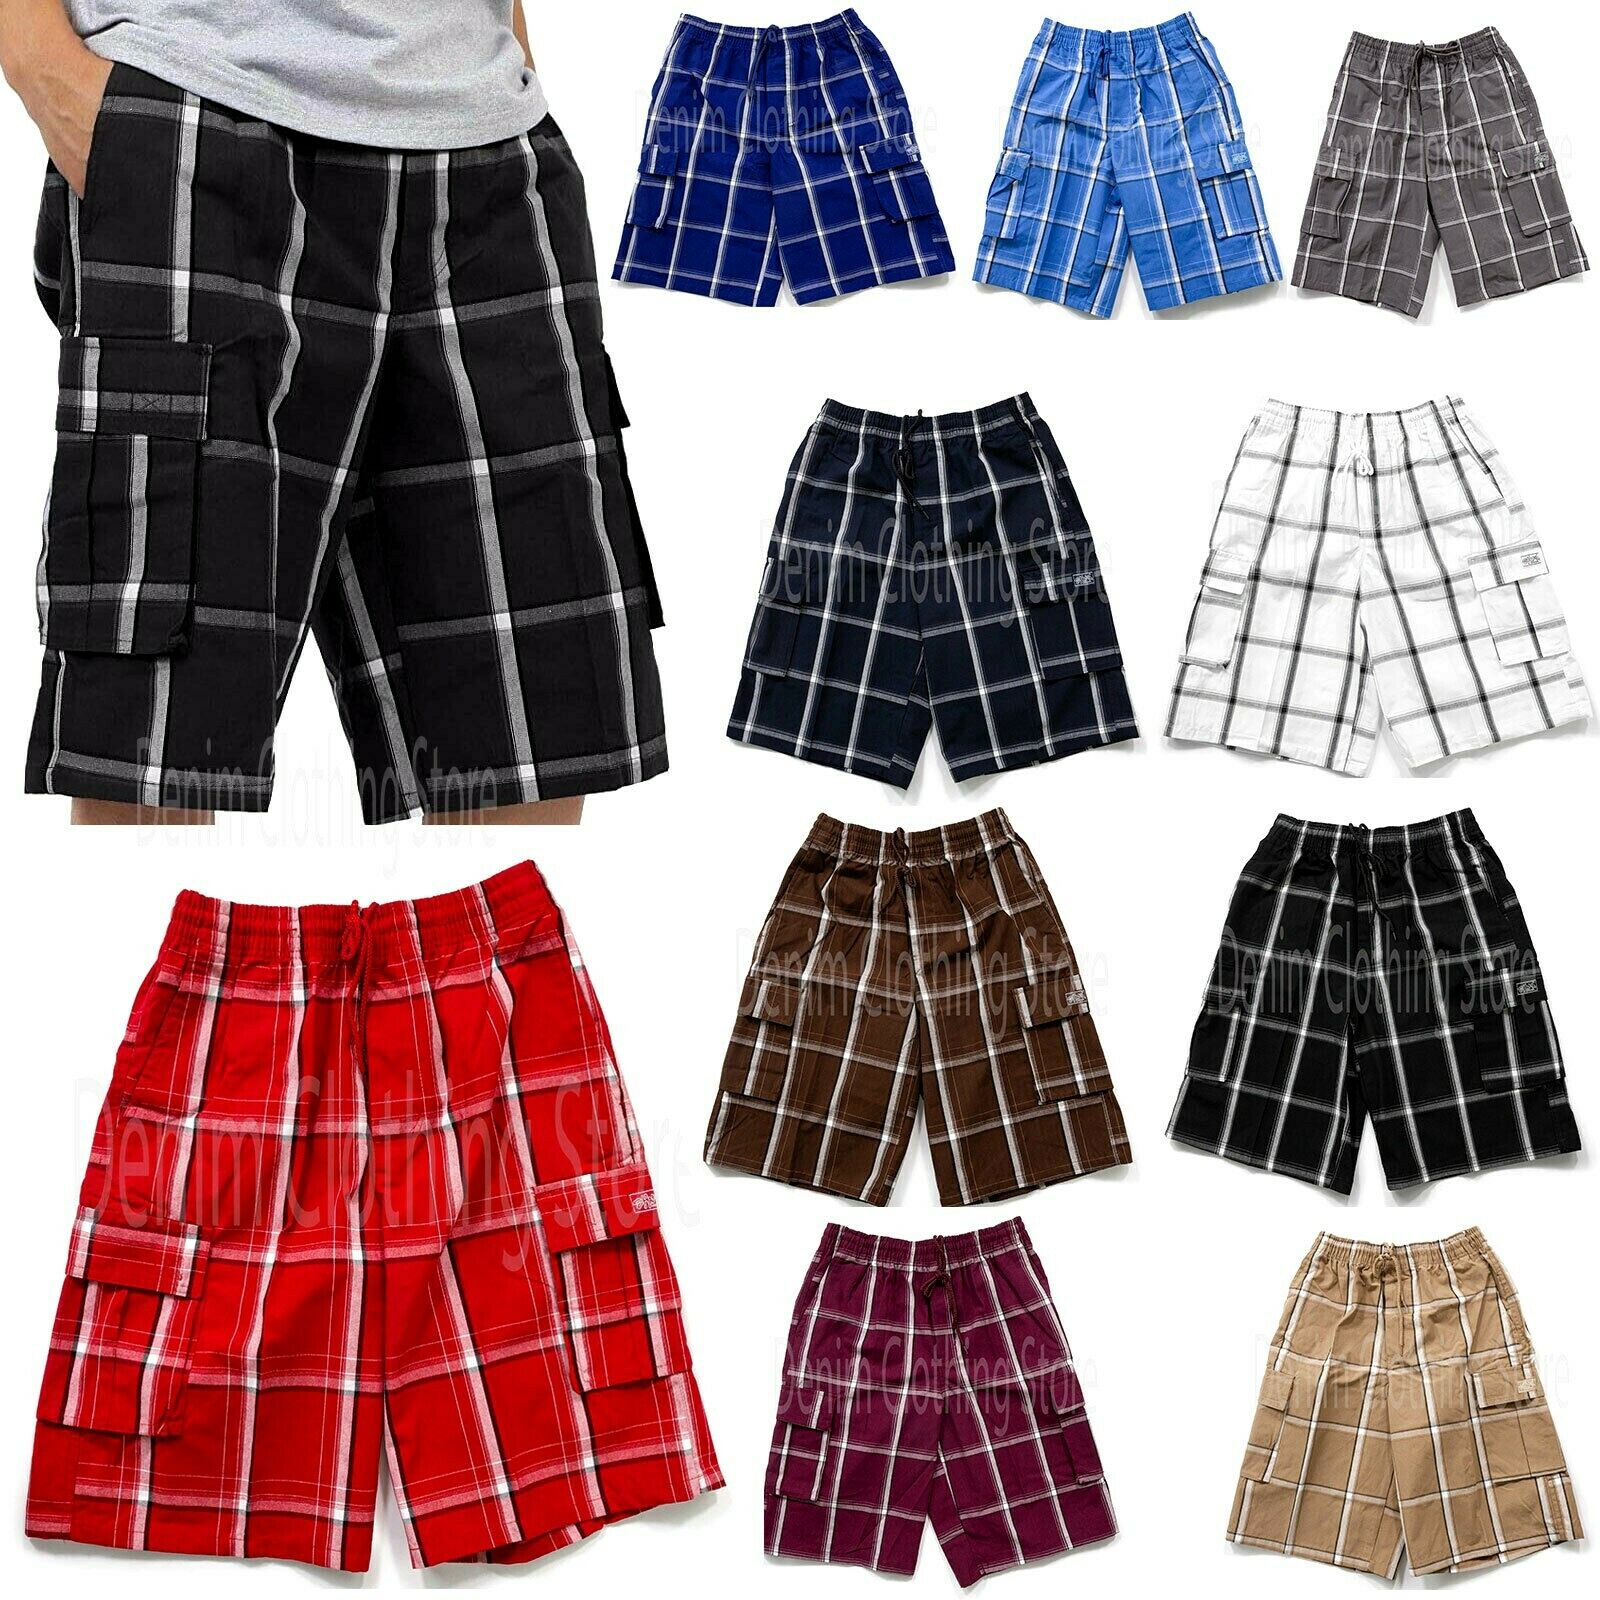 Shaka Wear Men's Checkered Relaxed Fit Plaid Cargo Shorts Loose Fitting S - 5xl